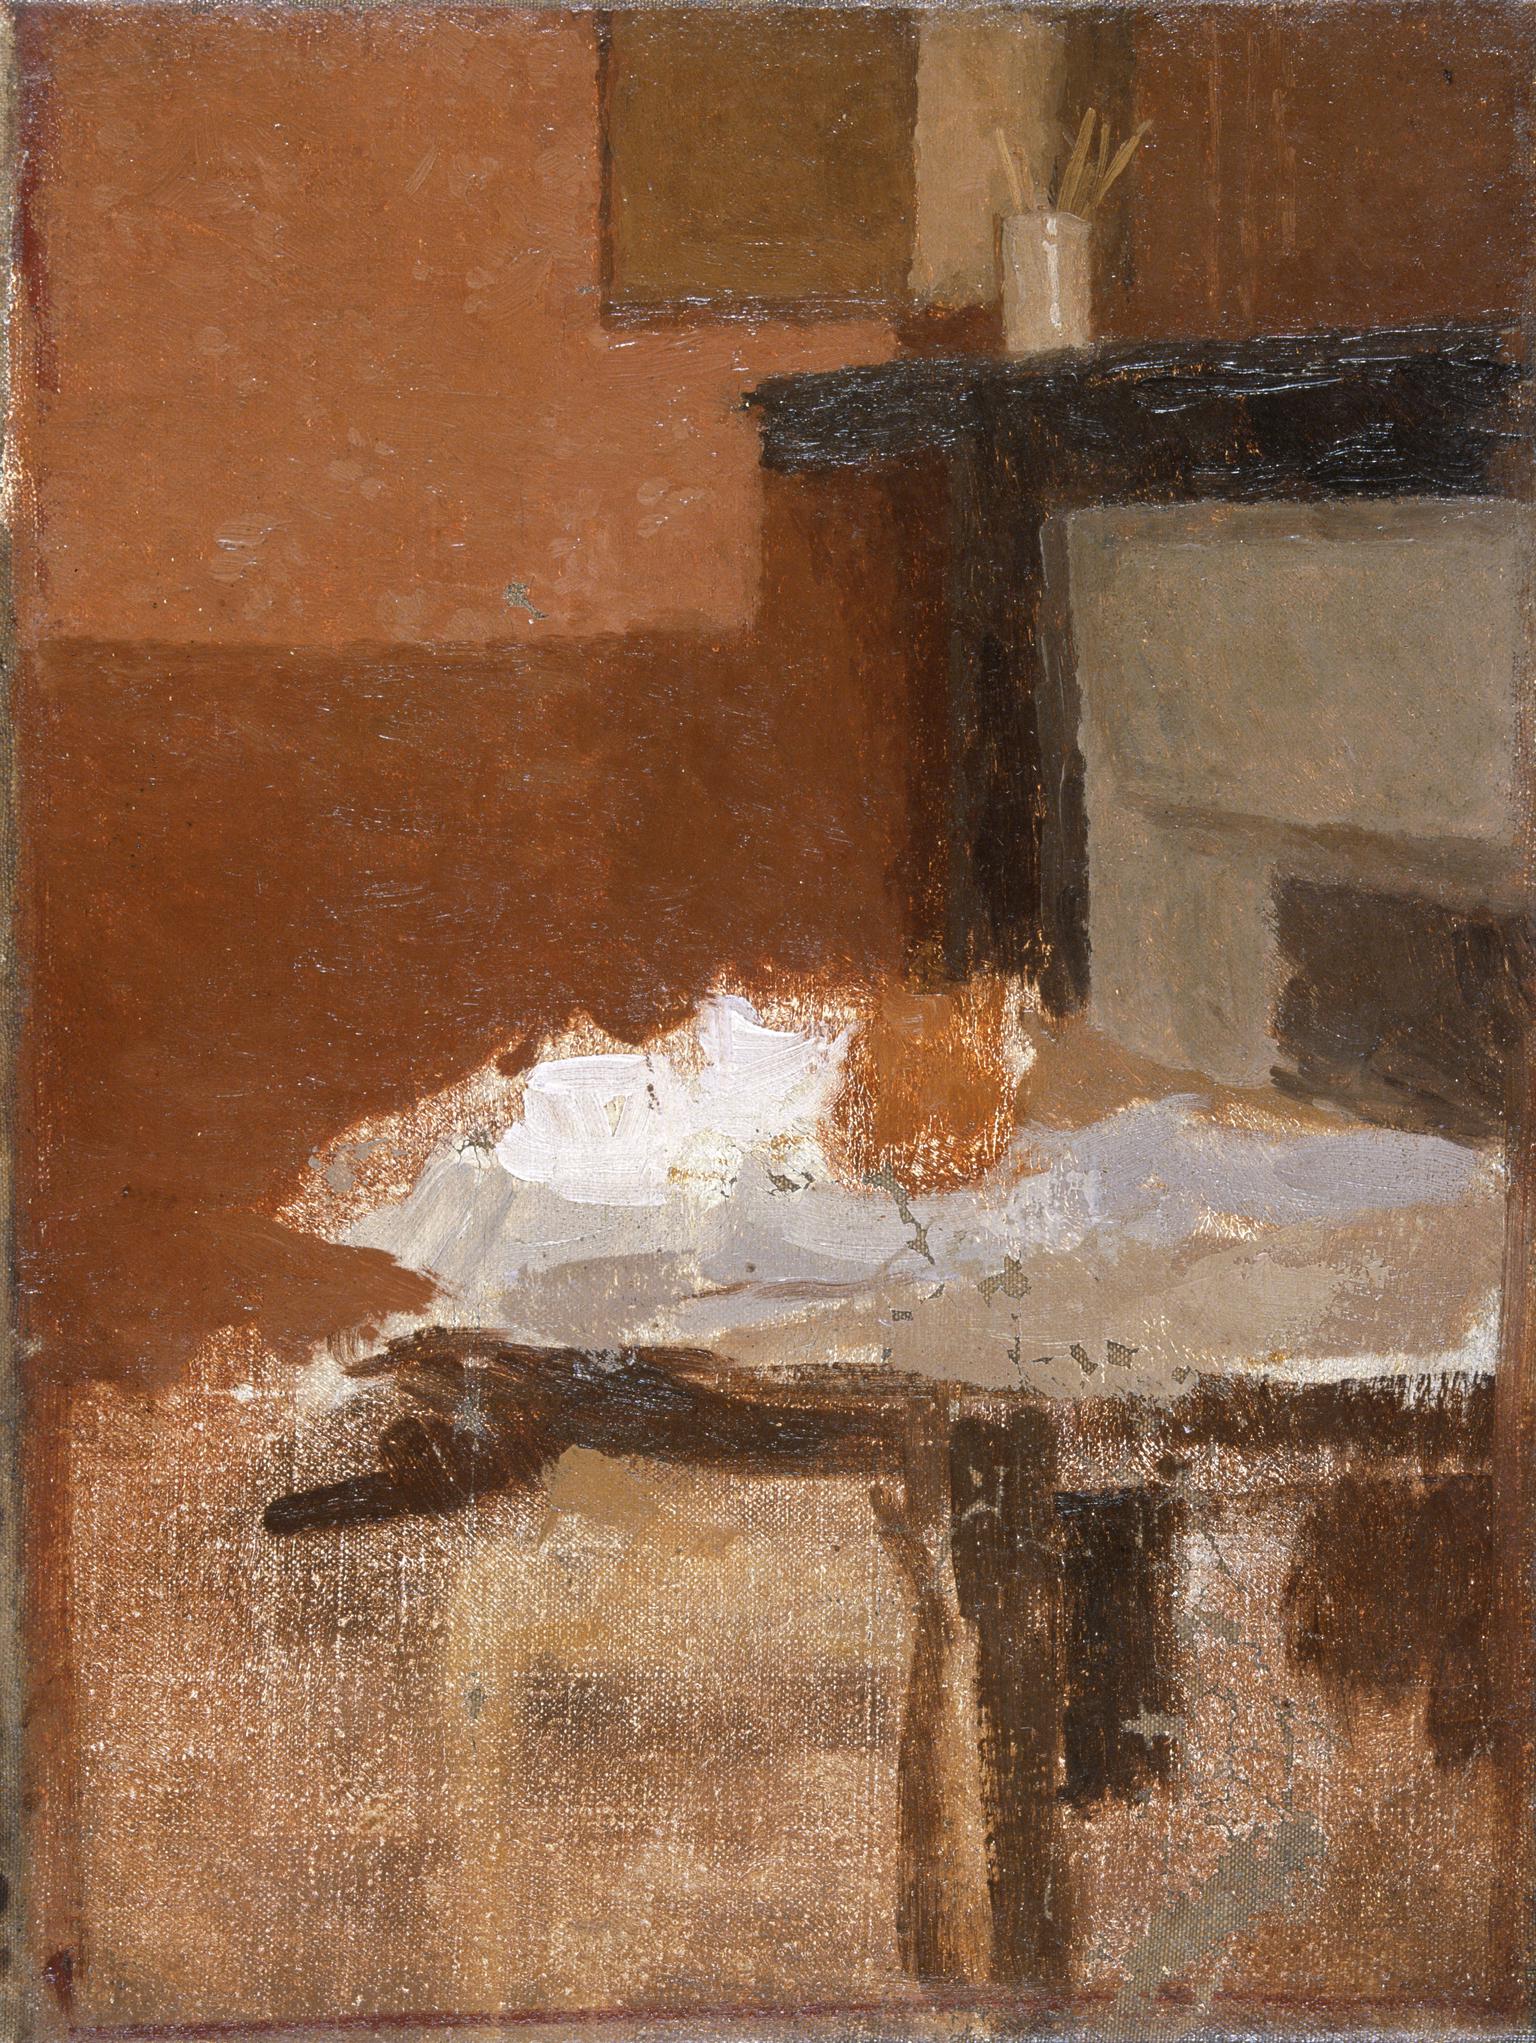 Study for the brown teapot